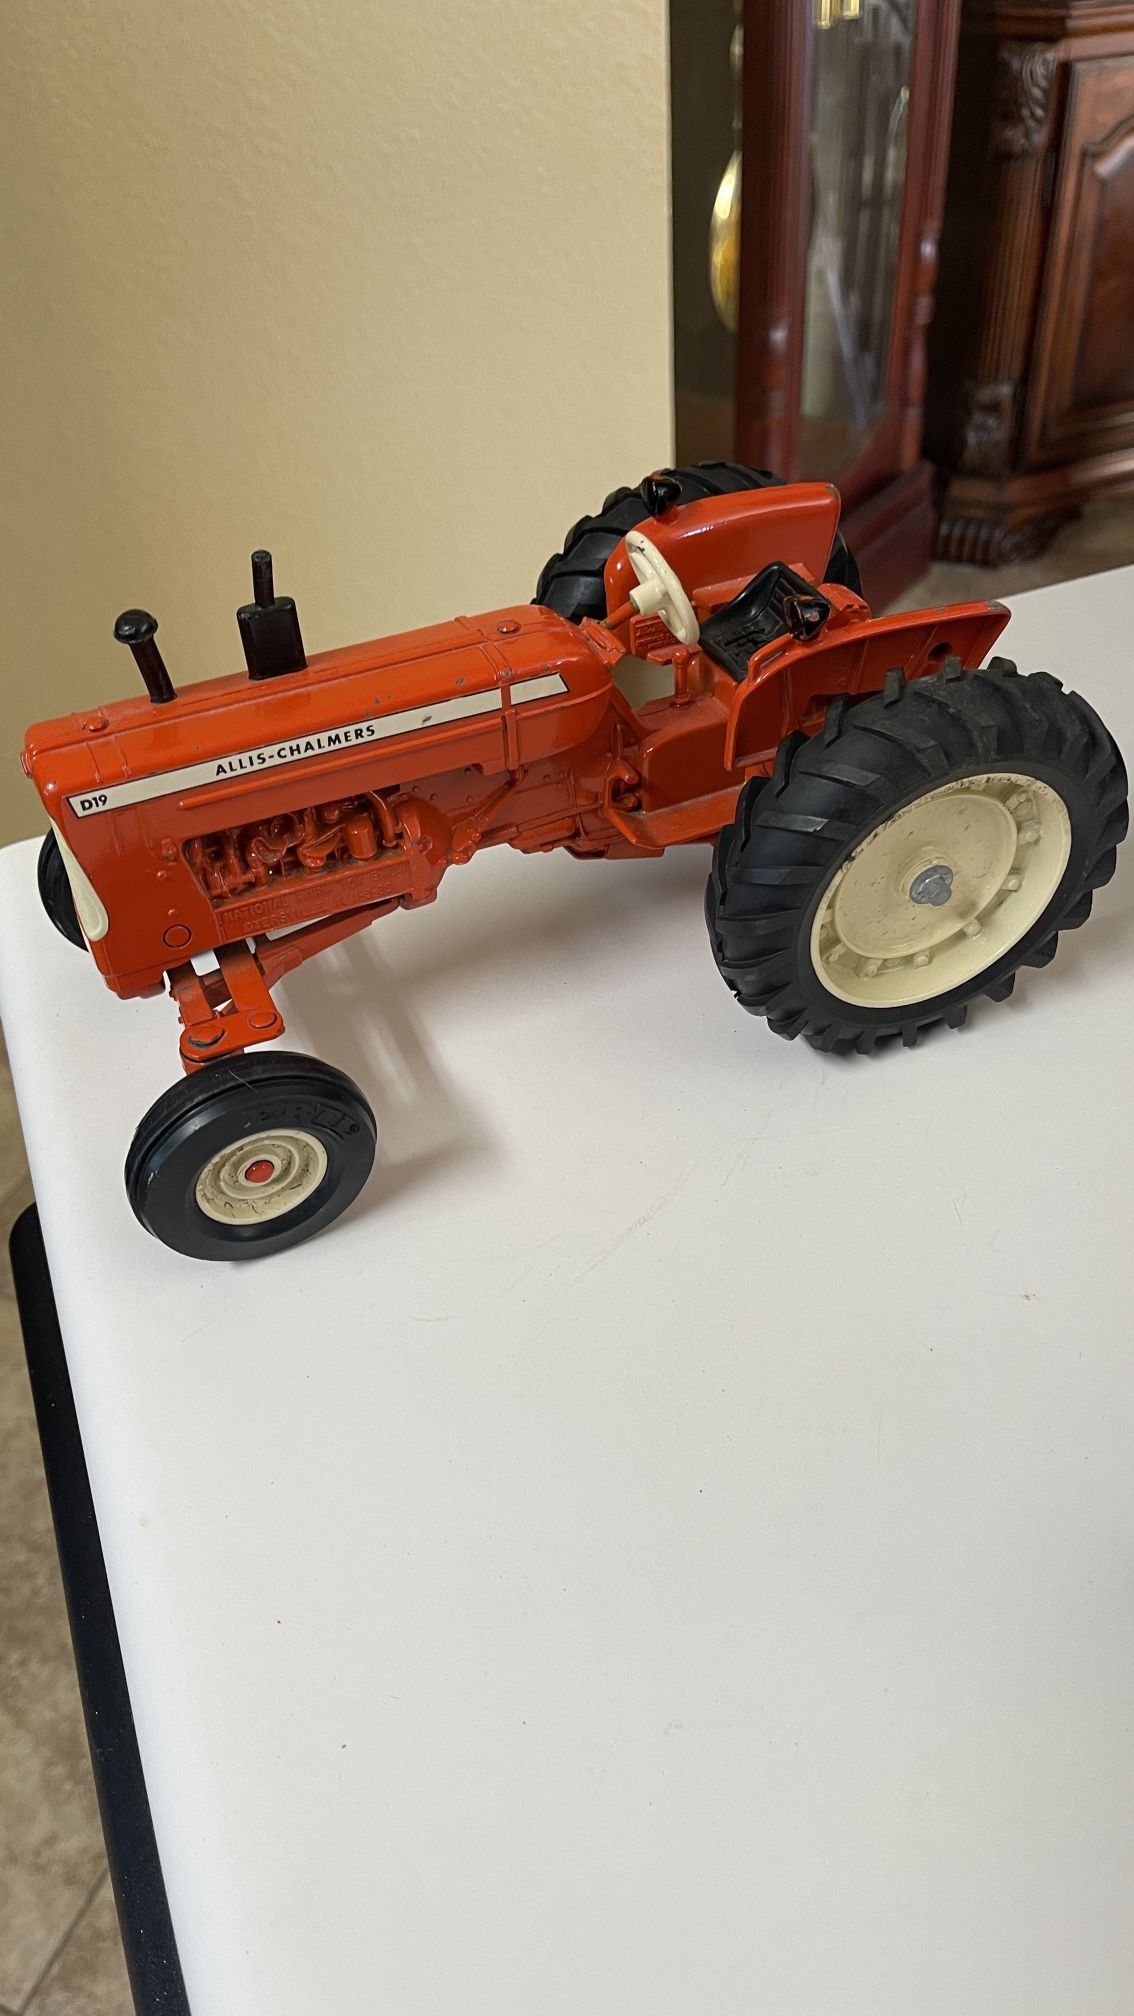 Allis Chalmers D19 Toy Farm Tractor 1/16 - Has A Paint Chips